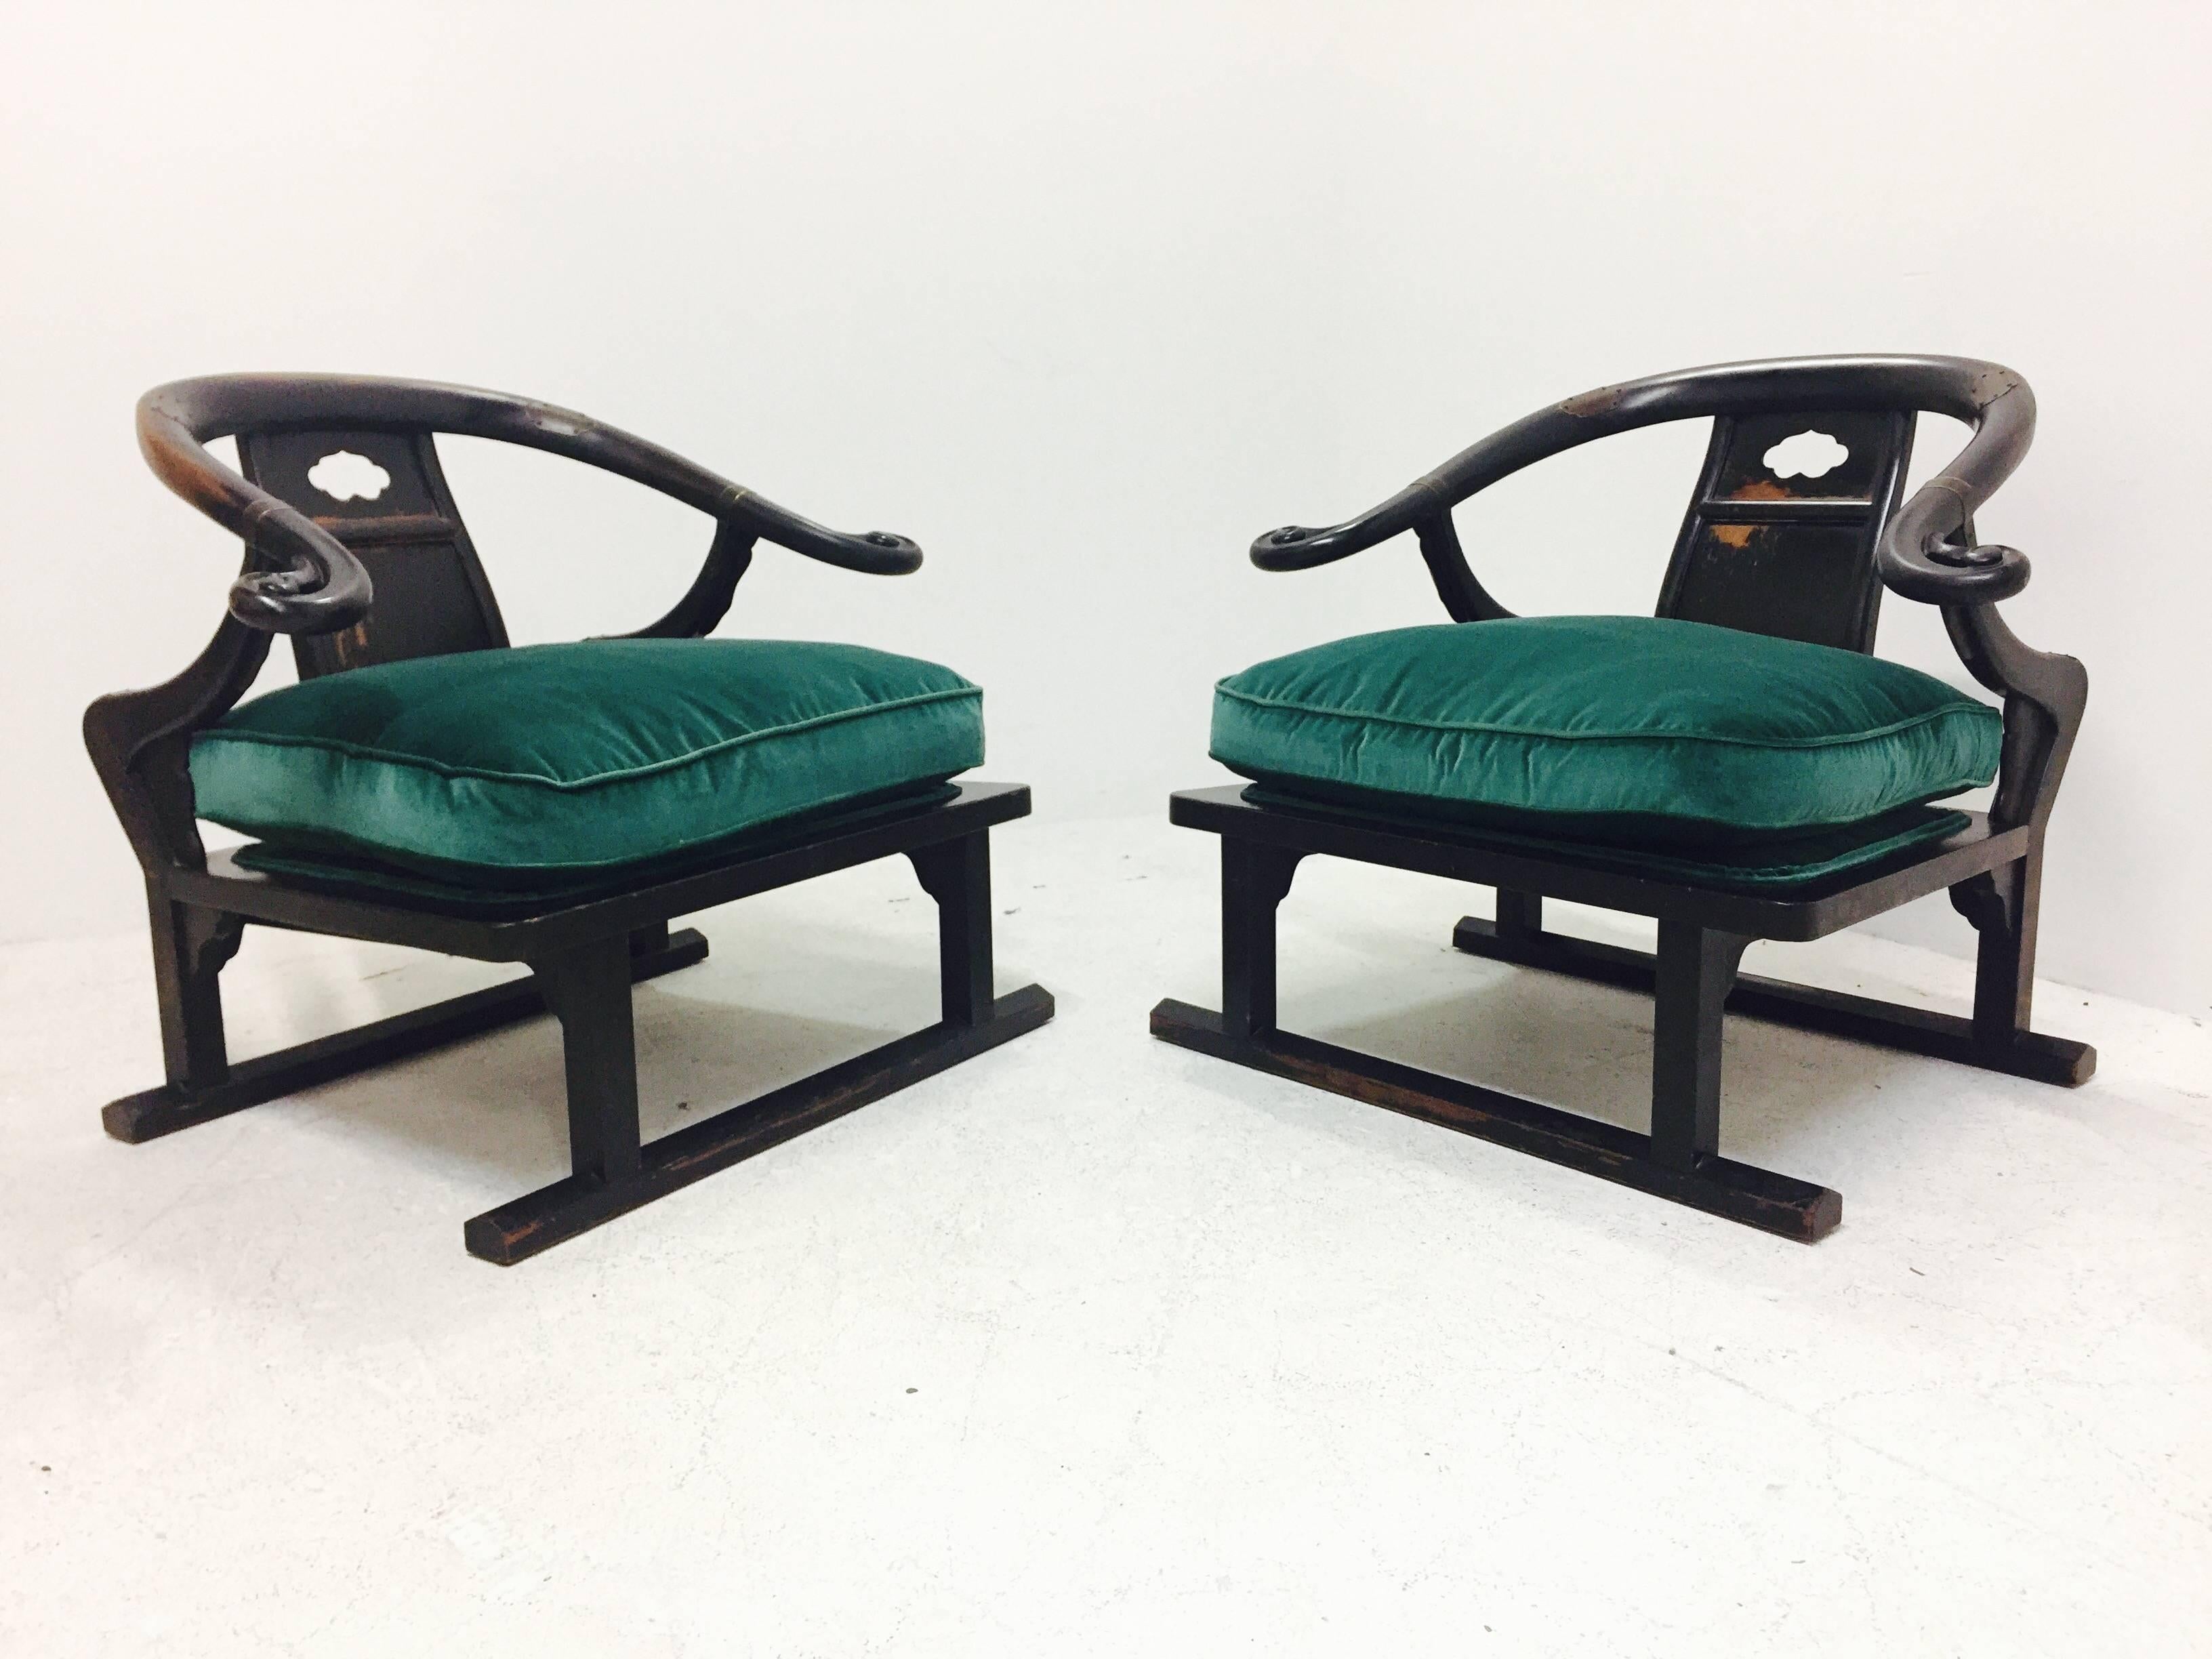 Pair of Ming Style lounge chairs. These chairs retain the warm patina of the wood and cushions have been re-upholstered in deep green velvet.

Dimensions: 31